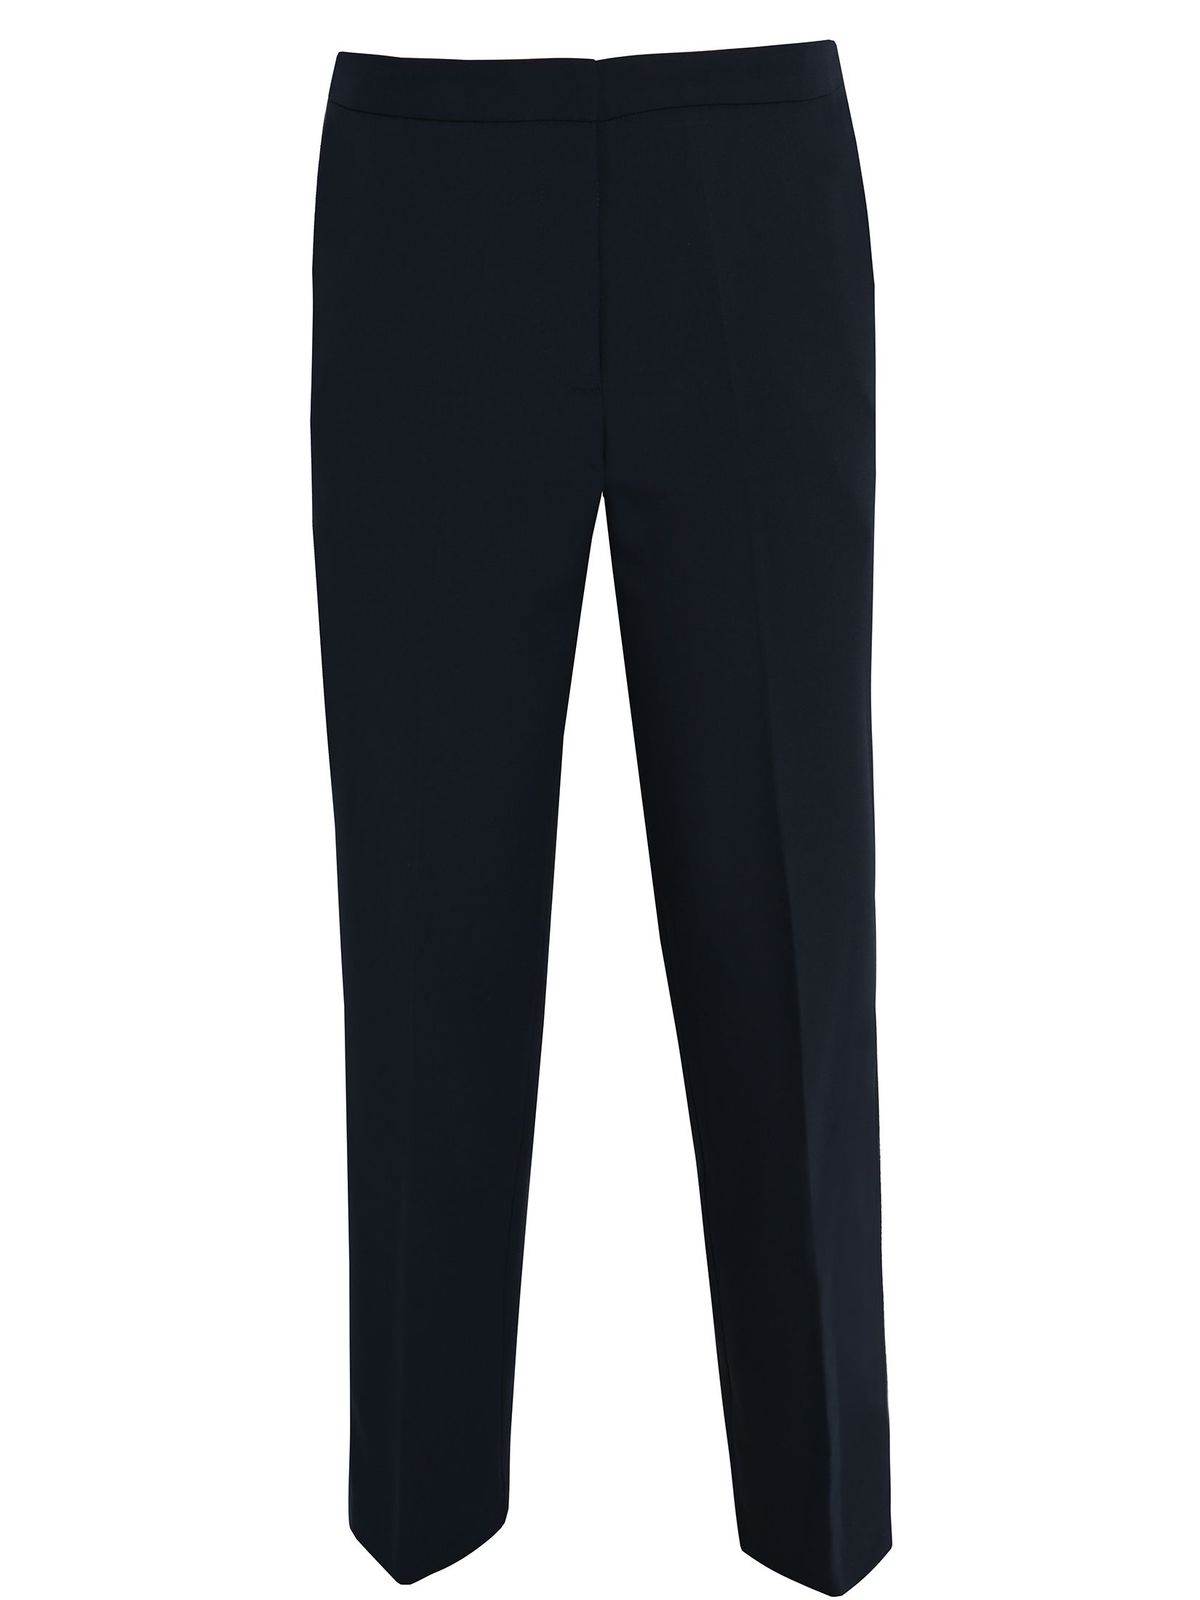 Dark blue trousers conical high waisted lateral pockets 4 - StarShinerS.com